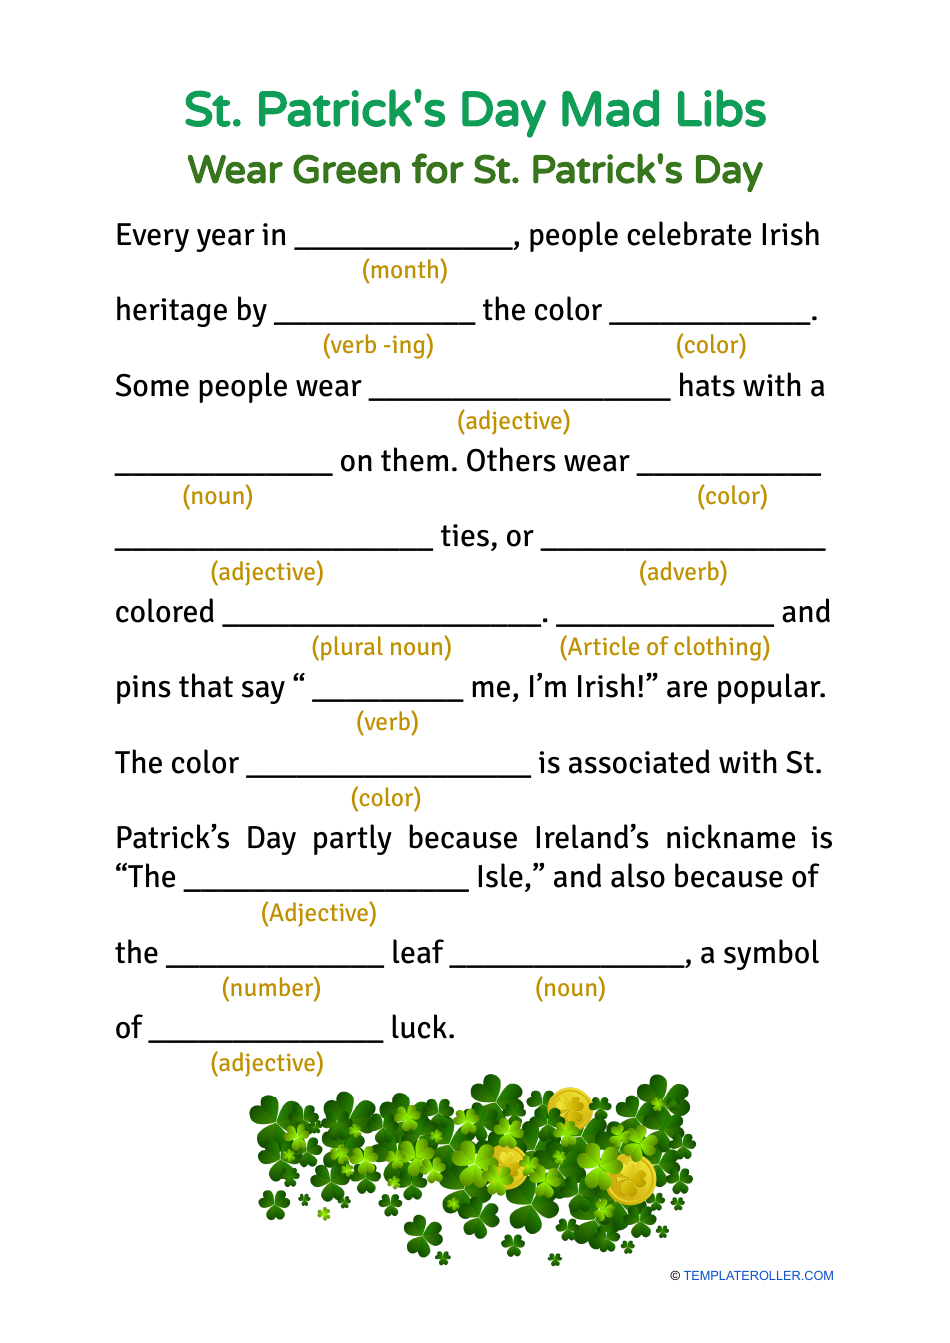 St. Patrick's Day Mad Libs - Display of the Wear Green document